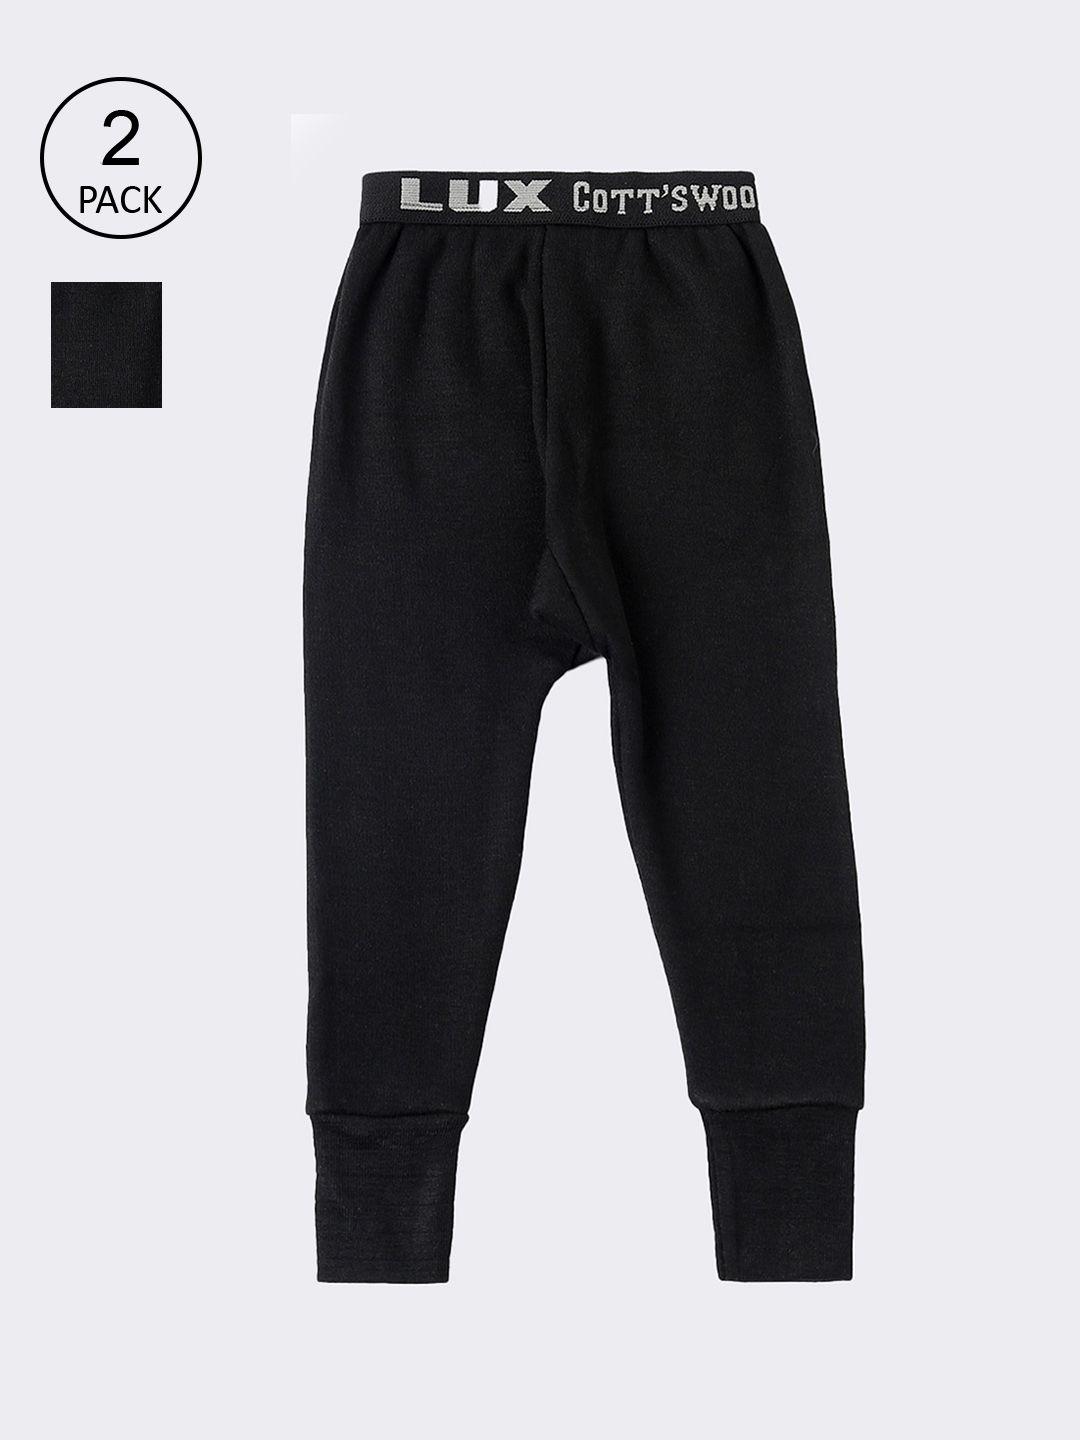 lux-cottswool-boys-black-pack-of-2-solid-cotton-thermal-bottoms